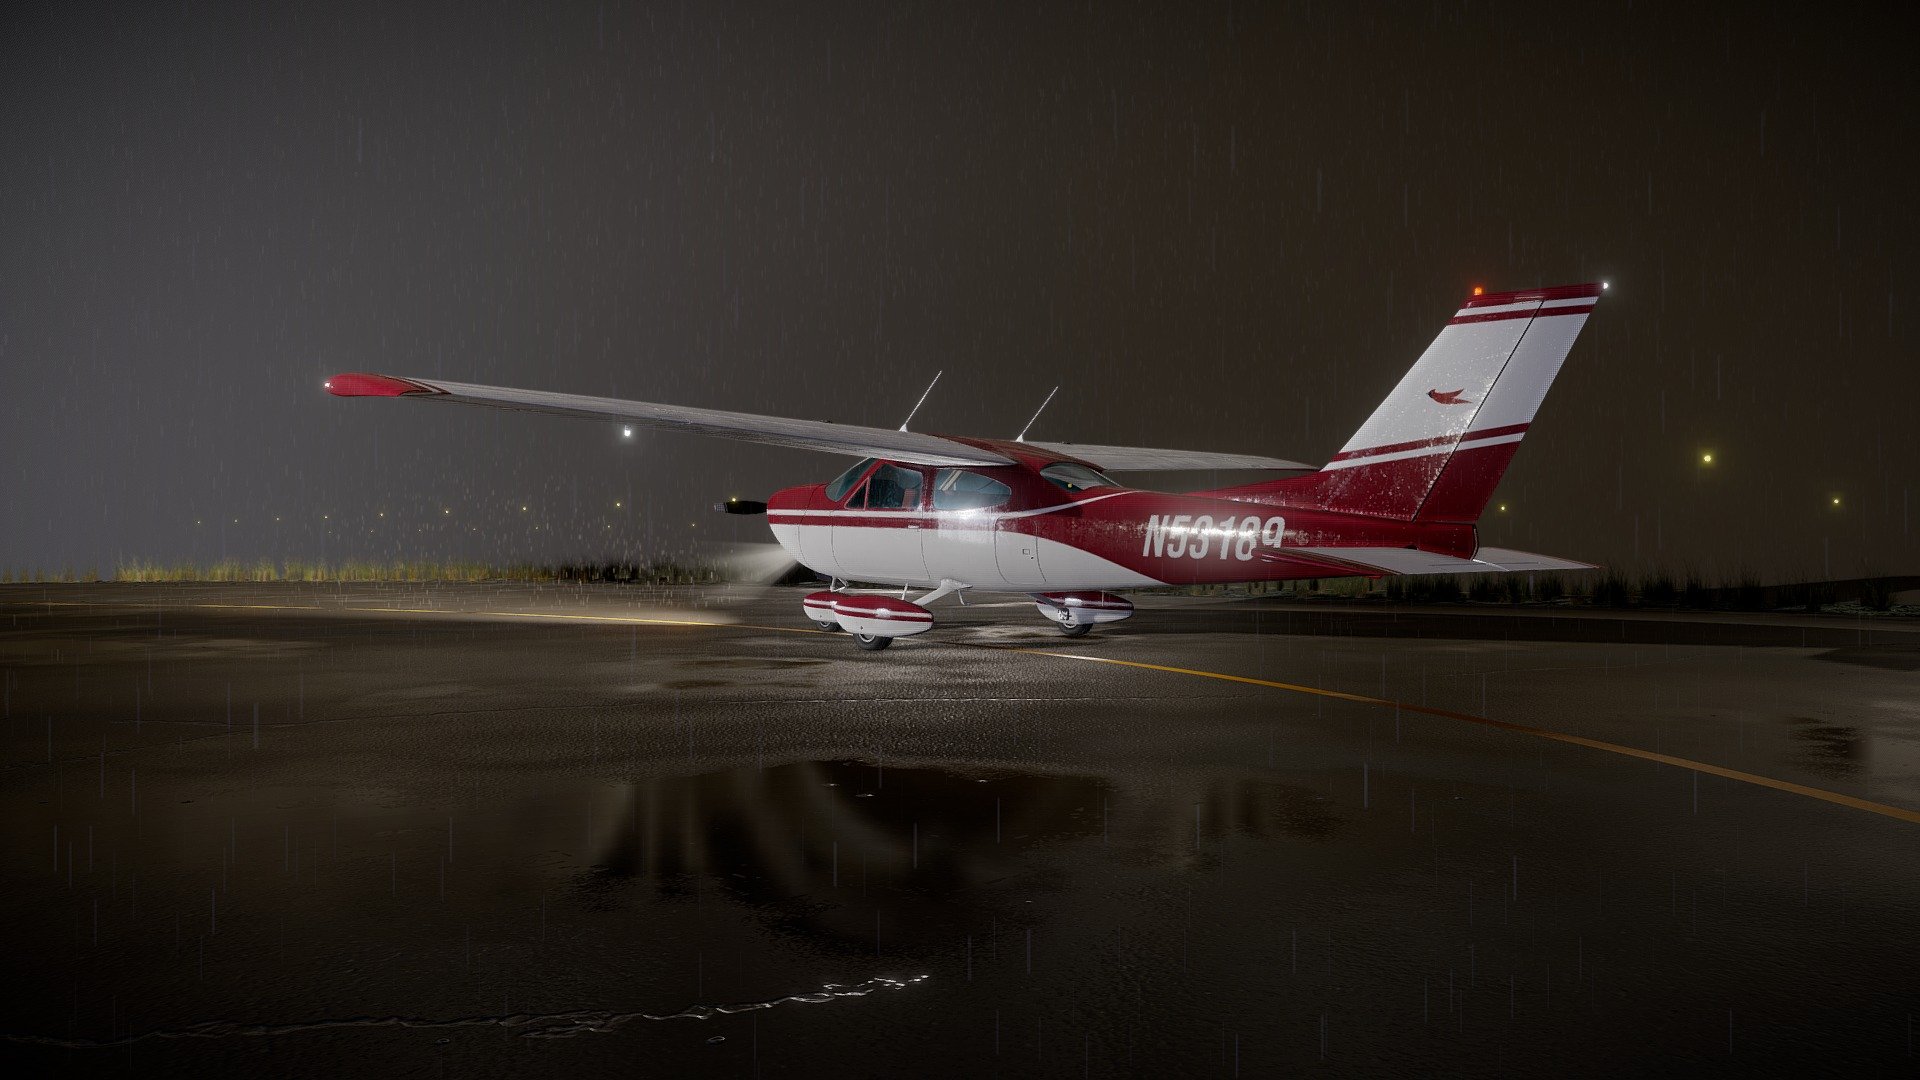 Rainy night scene i made for fun with the Cessna 177 Cardinal.
I modeled it in 3dsmax and i made the textures in Substance Painter.
You can find this Cessna in better quality with 4K textures here : https://sketchfab.com/3d-models/cessna-177-cardinal-4k-6d00ced8bf7b4a98b808fad320f2fc1b
I hope you enjoy the result :) - Rainy night Cessna 177 Cardinal - 3D model by Escou 3d model